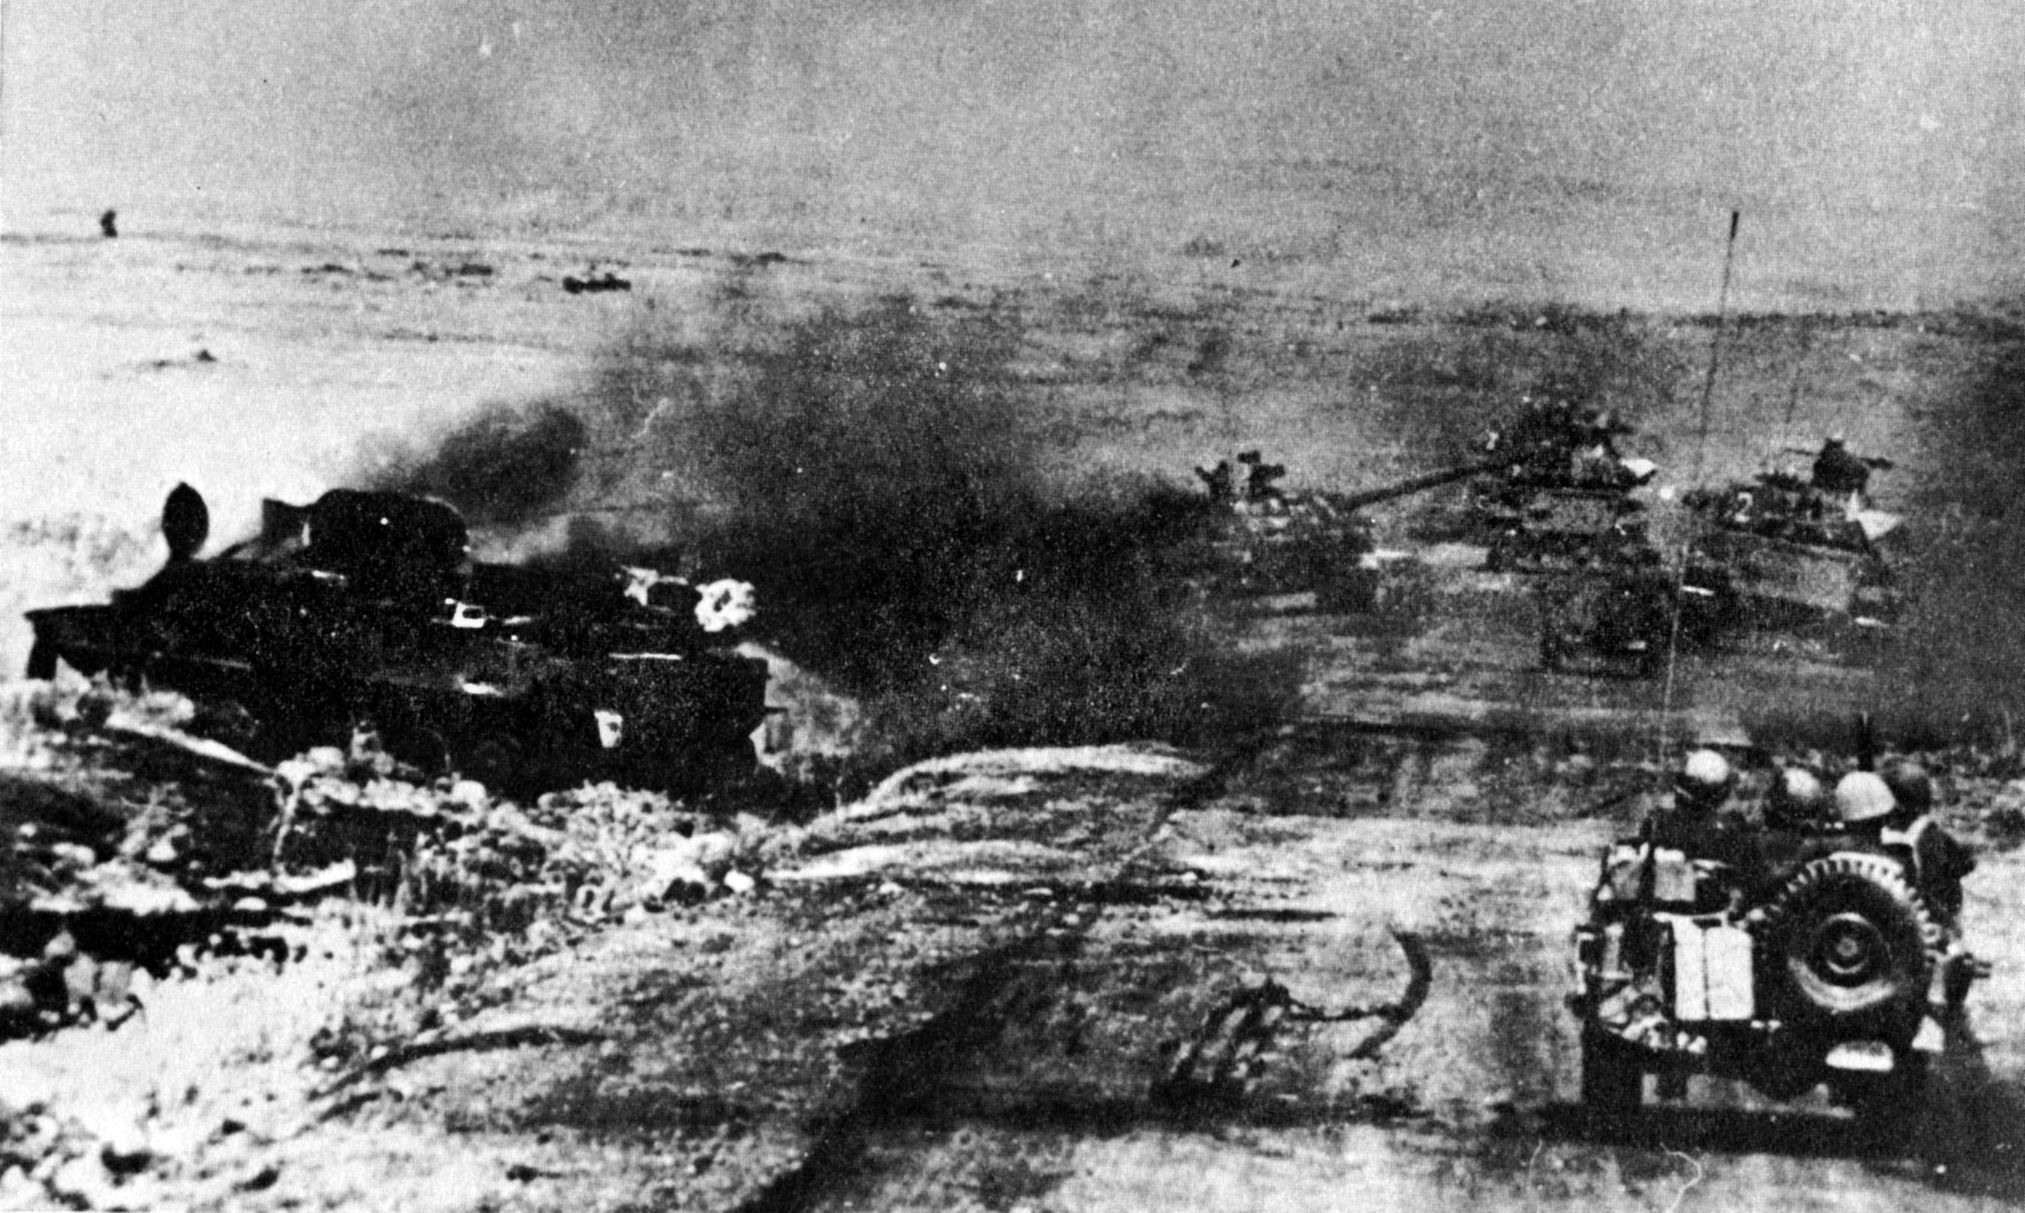 By October 9, the third day of the war, Syrian forces in the central and southern area of the Golan Heights were withdrawing in the face of the Israeli counter-attack. Multitudes of Syrian tanks and other vehicles, destroyed or abandoned, were scattered across the plains.